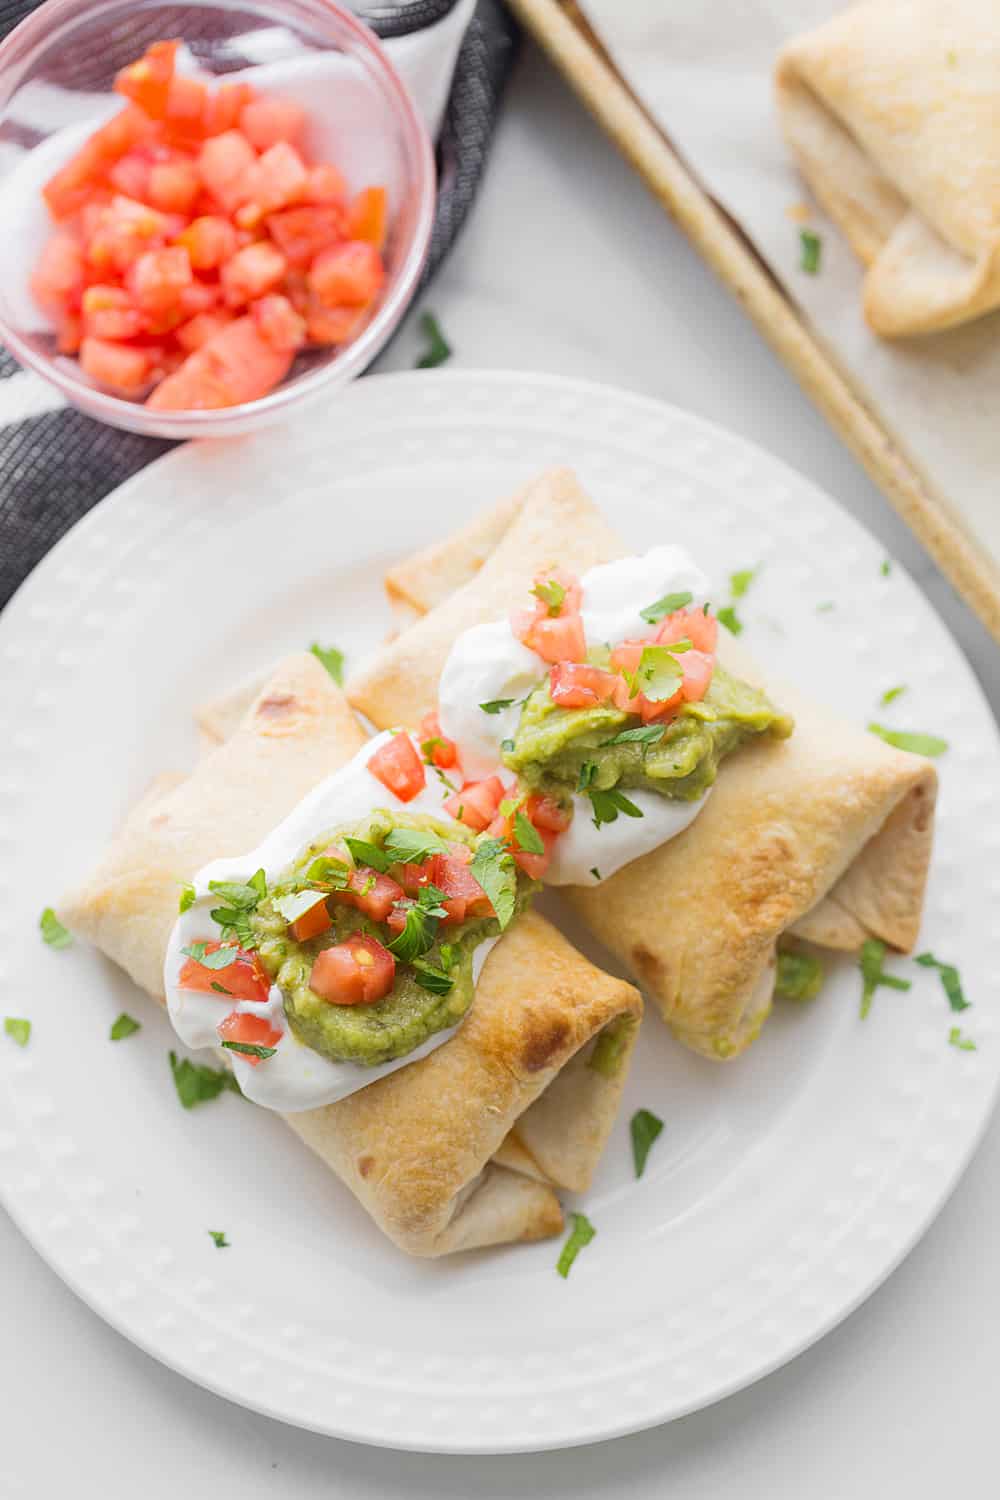 Baked Chicken Chimichangas - Baked chicken chimichangas make for a fun, flavorful alternative to tacos for Taco Tuesday. They're also a super tasty freezer meal! #mexicanrecipe #mexicanfood #chimichangas #easyrecipe #freezermeal #freezerrecipe #halfscratched #tacotuesday